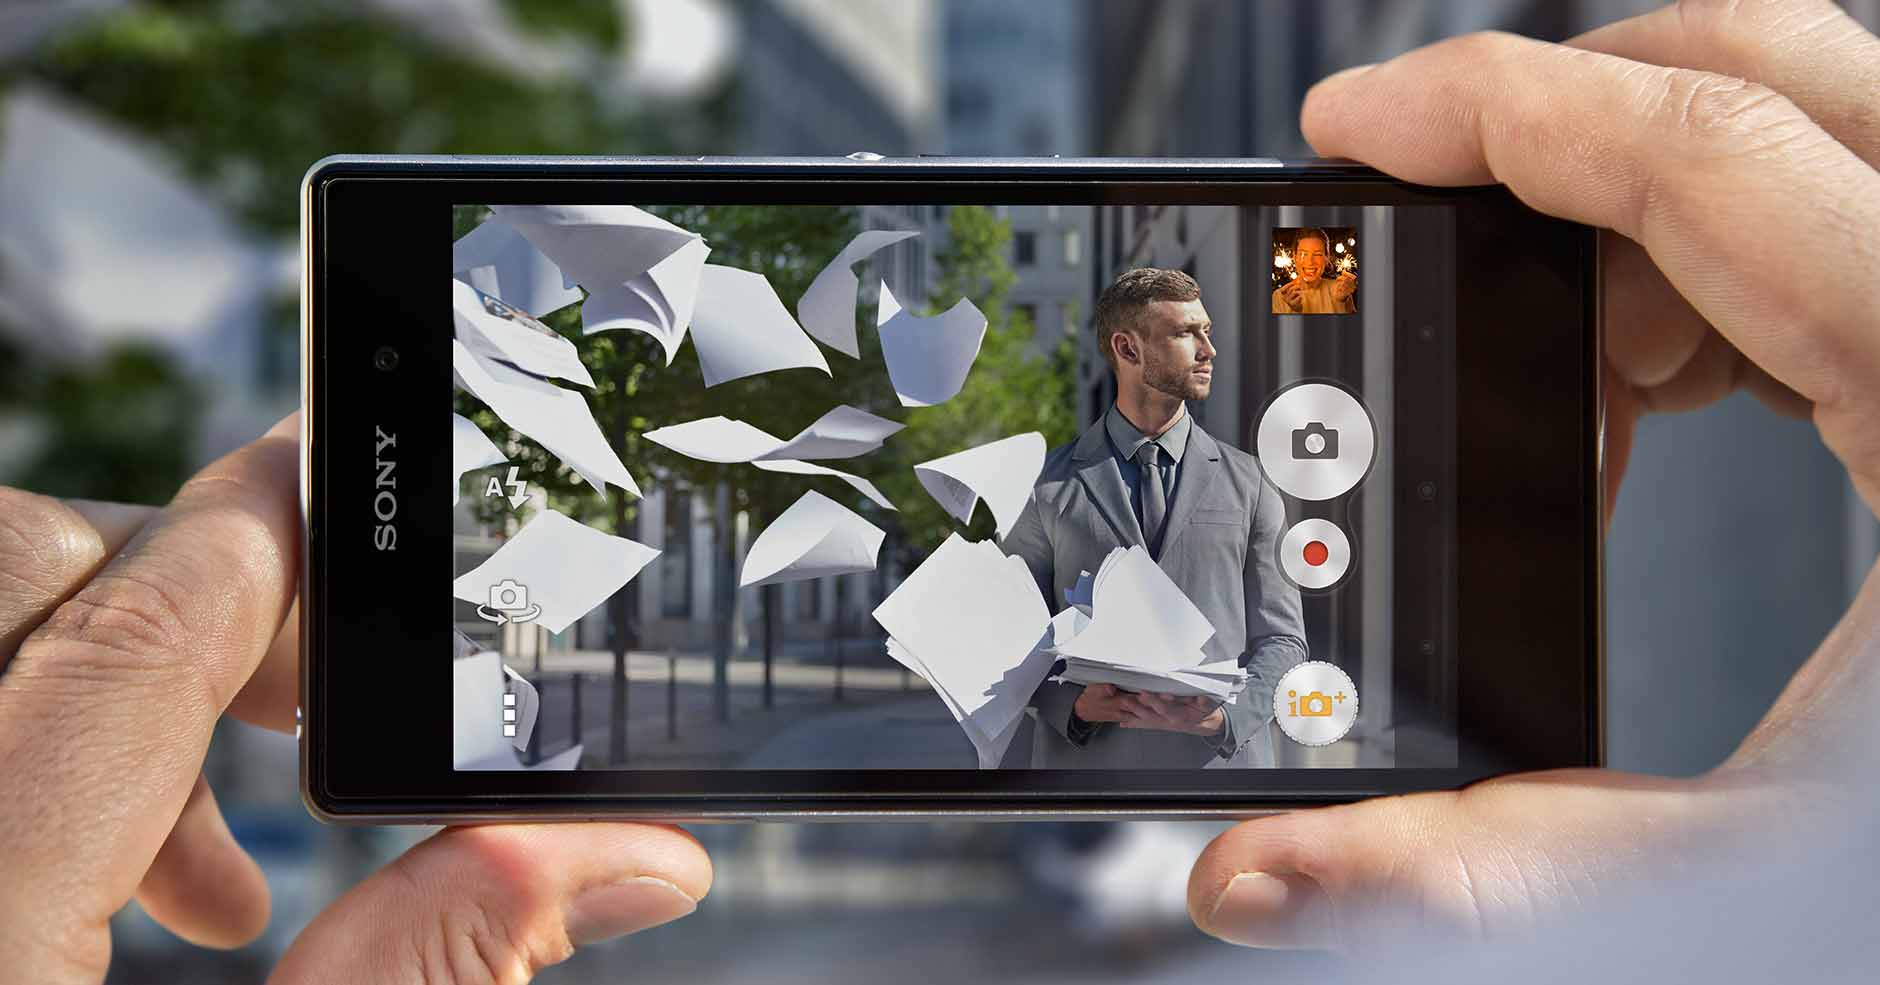 The best camera phone, Xperia Z1 from Sony, features 3x clear image zoom.